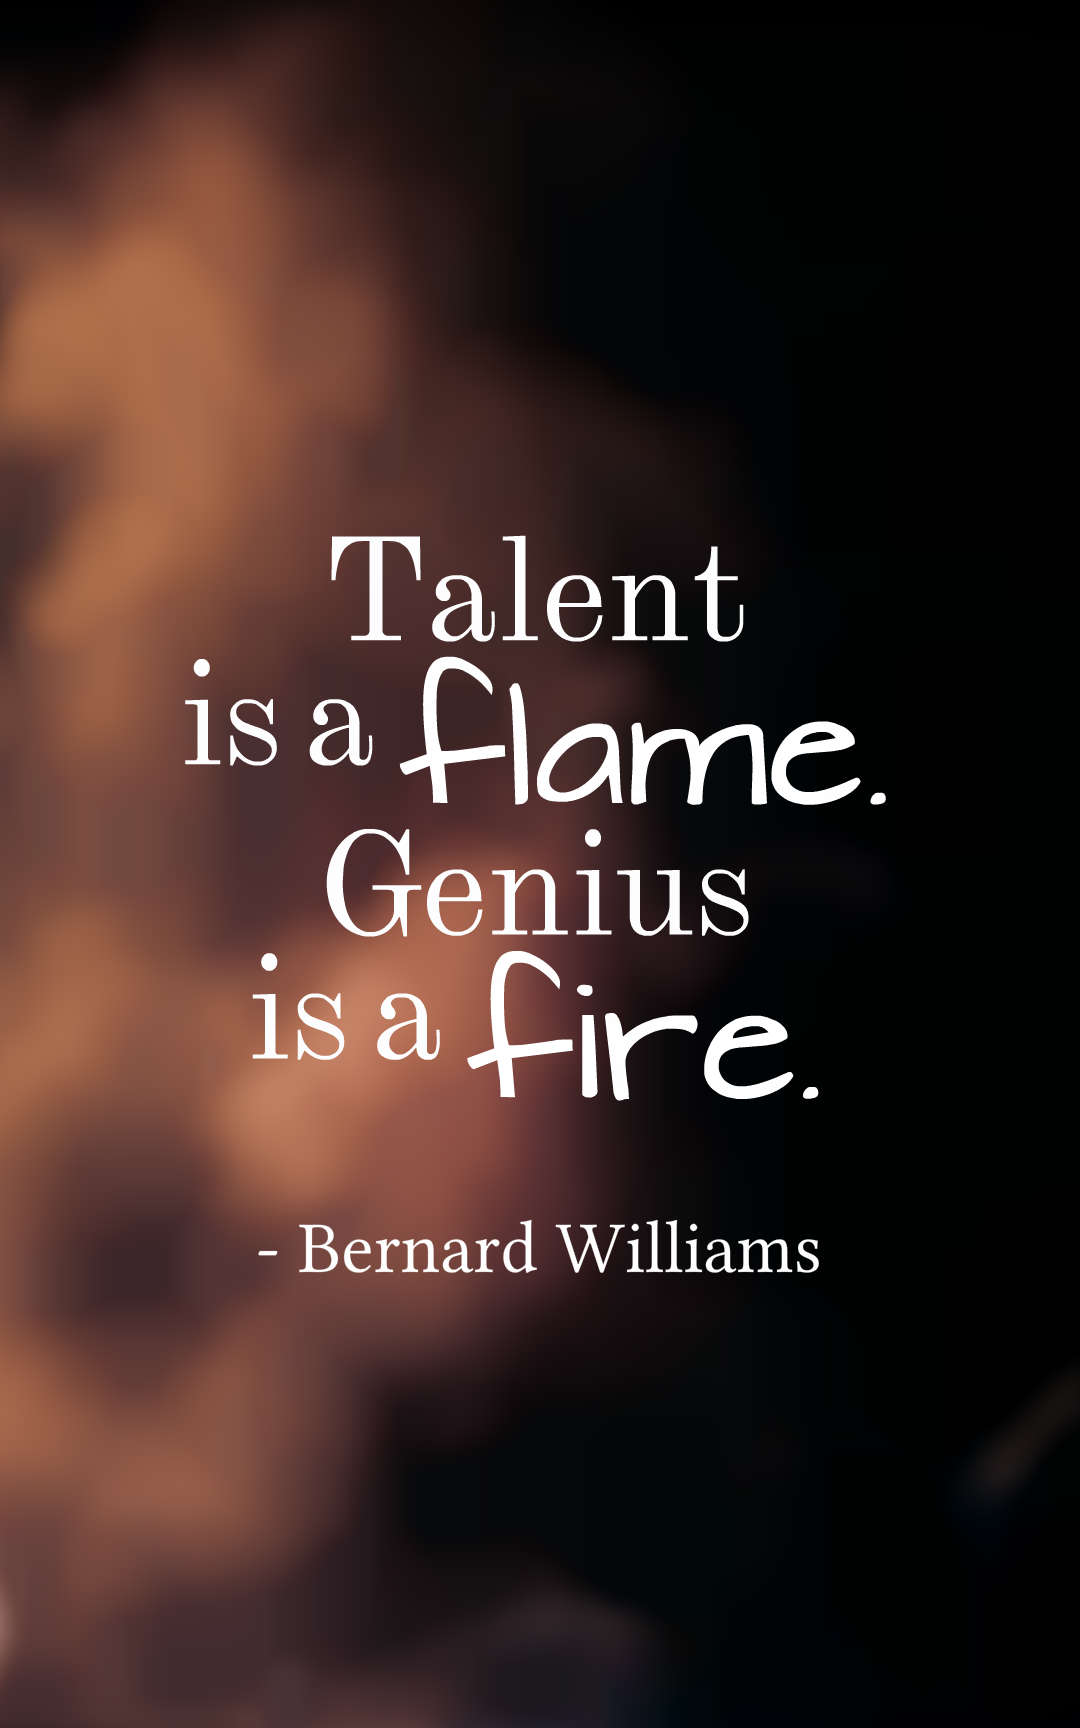 Talent is a flame. Genius is a fire.